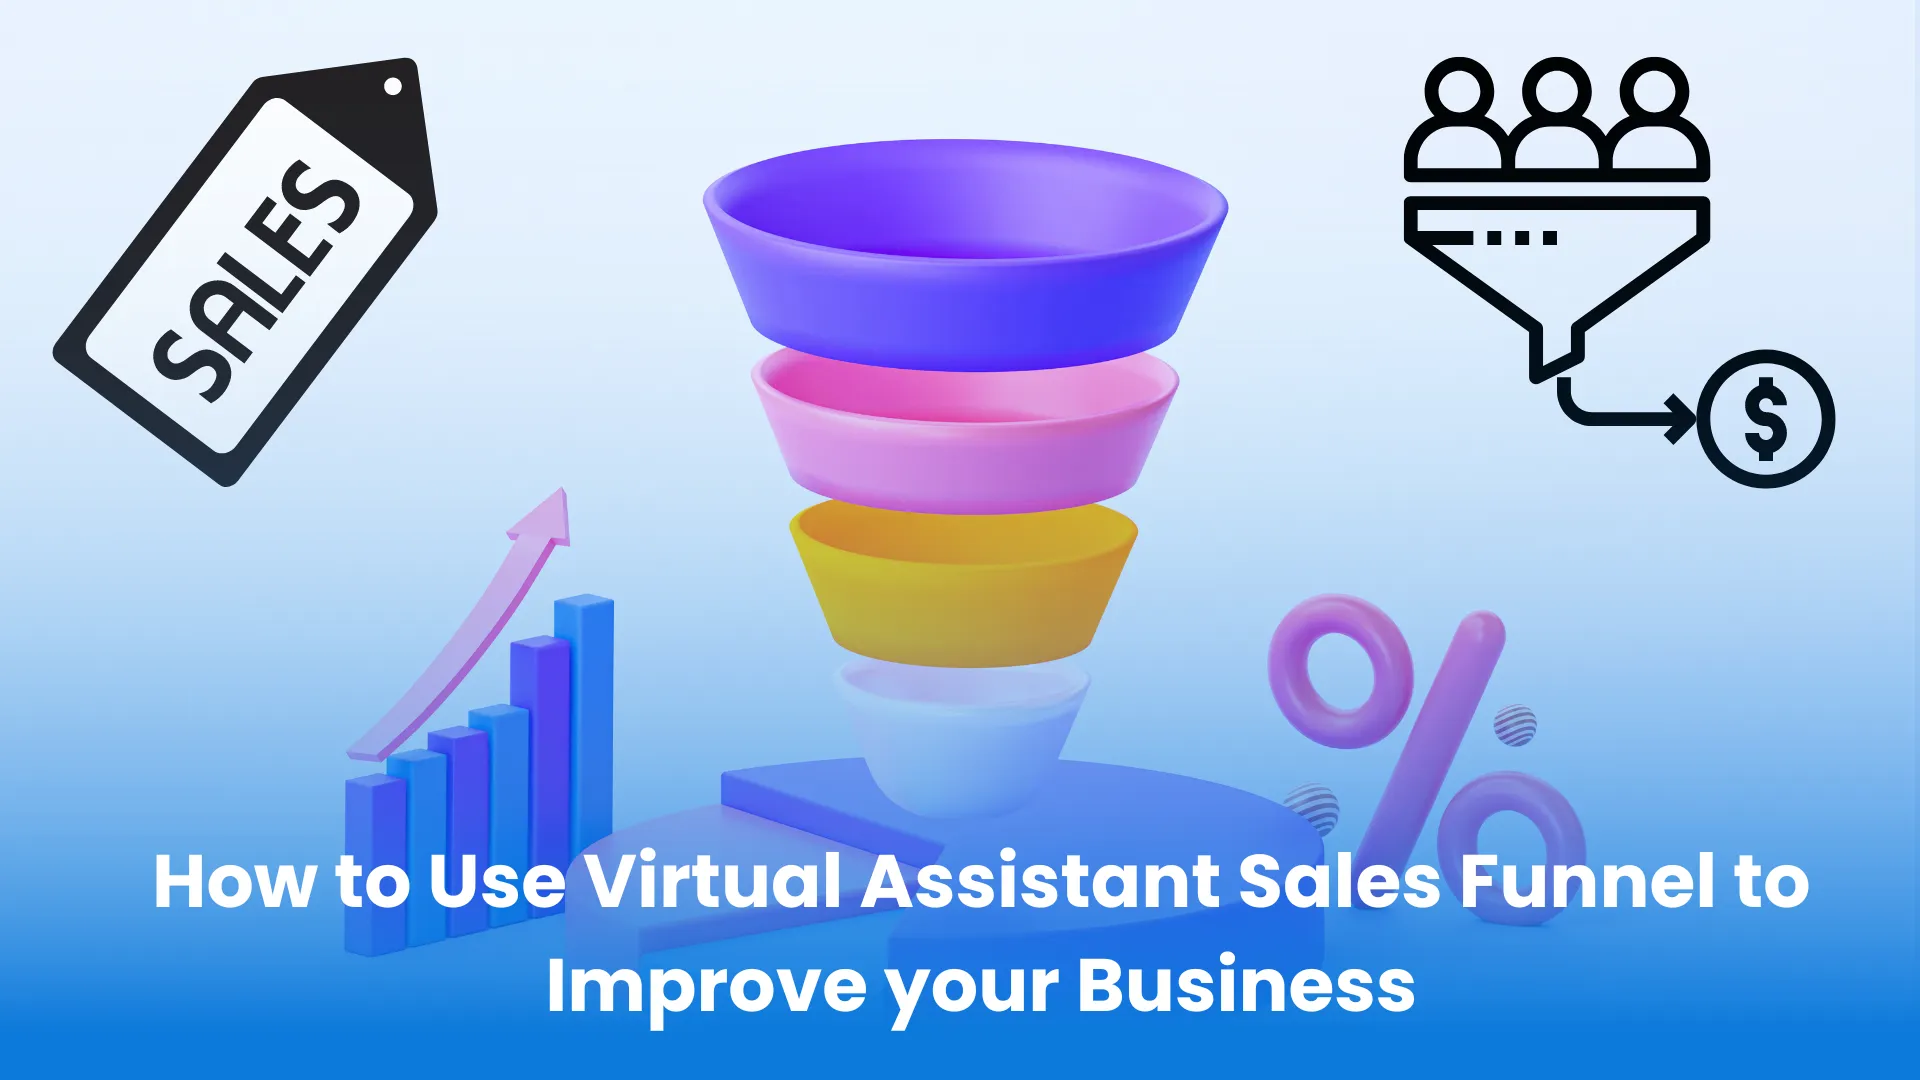 Learn how to leverage a virtual assistant sales funnel to enhance your business with professional services.